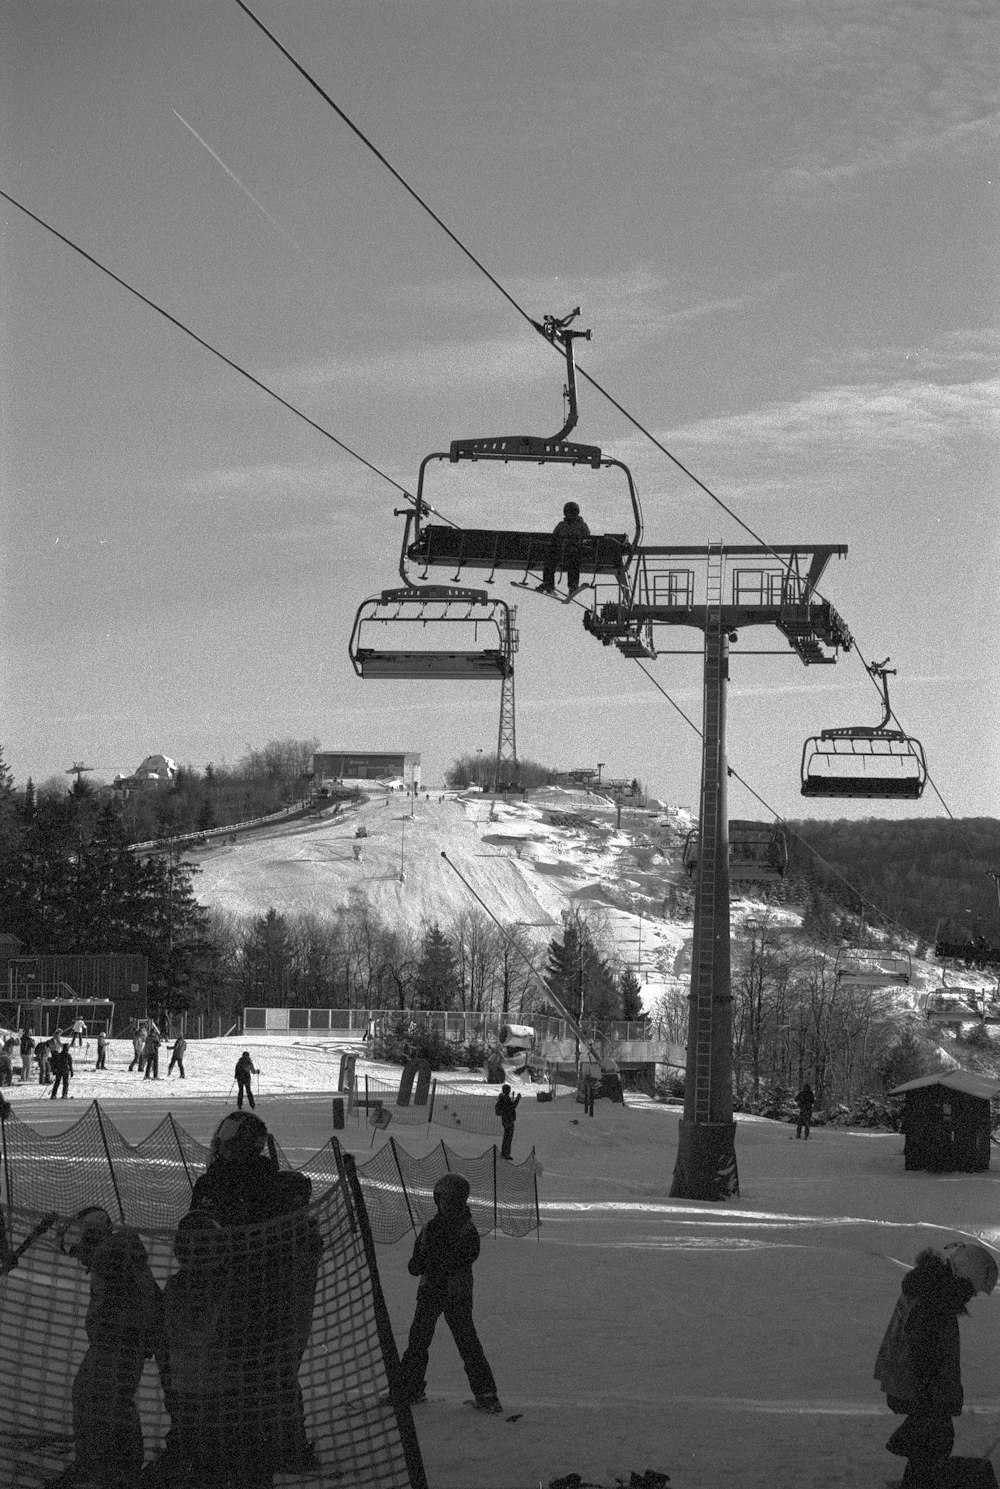 a ski lift carrying skiers up a snowy hill